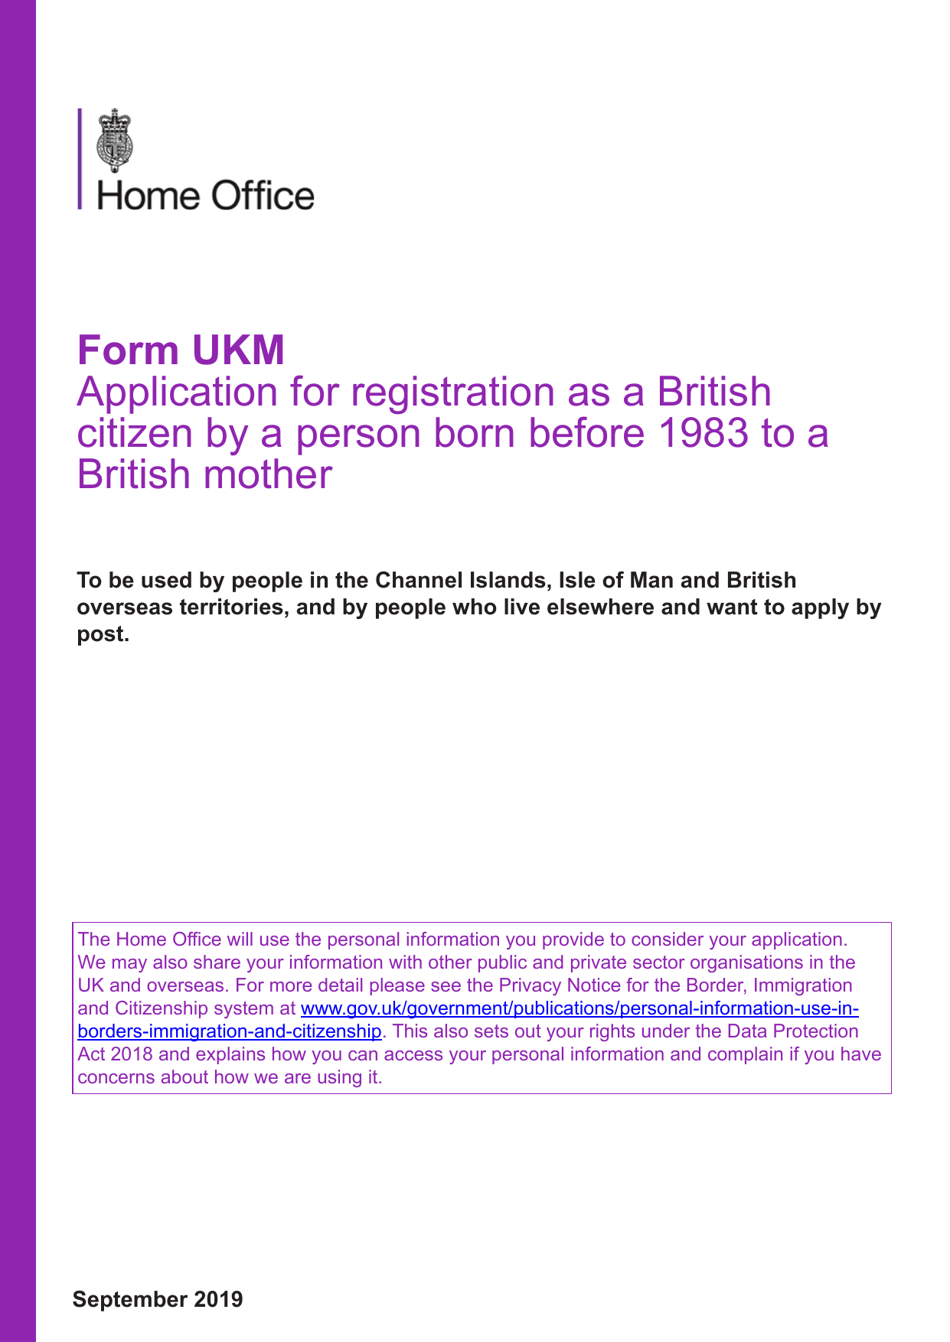 Form UKM Application for Registration as a British Citizen by a Person Born Before 1983 to a British Mother - United Kingdom, Page 1